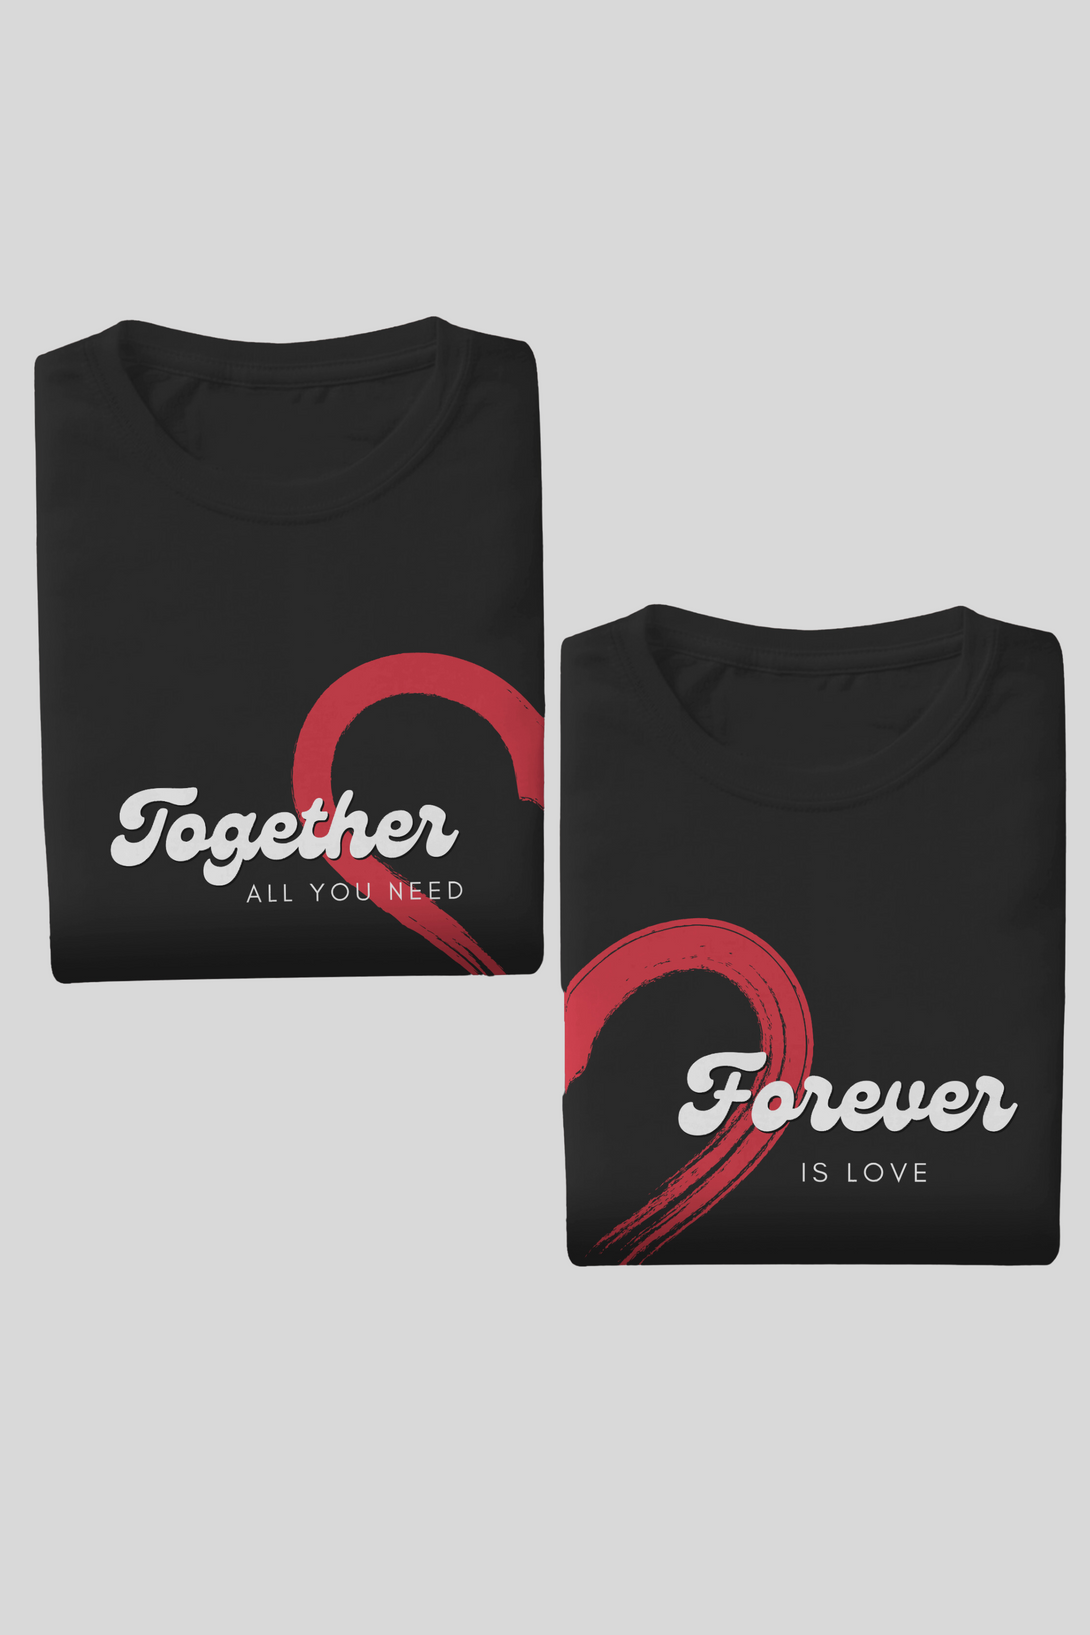 Together Forever Couple T Shirt - WowWaves - 1